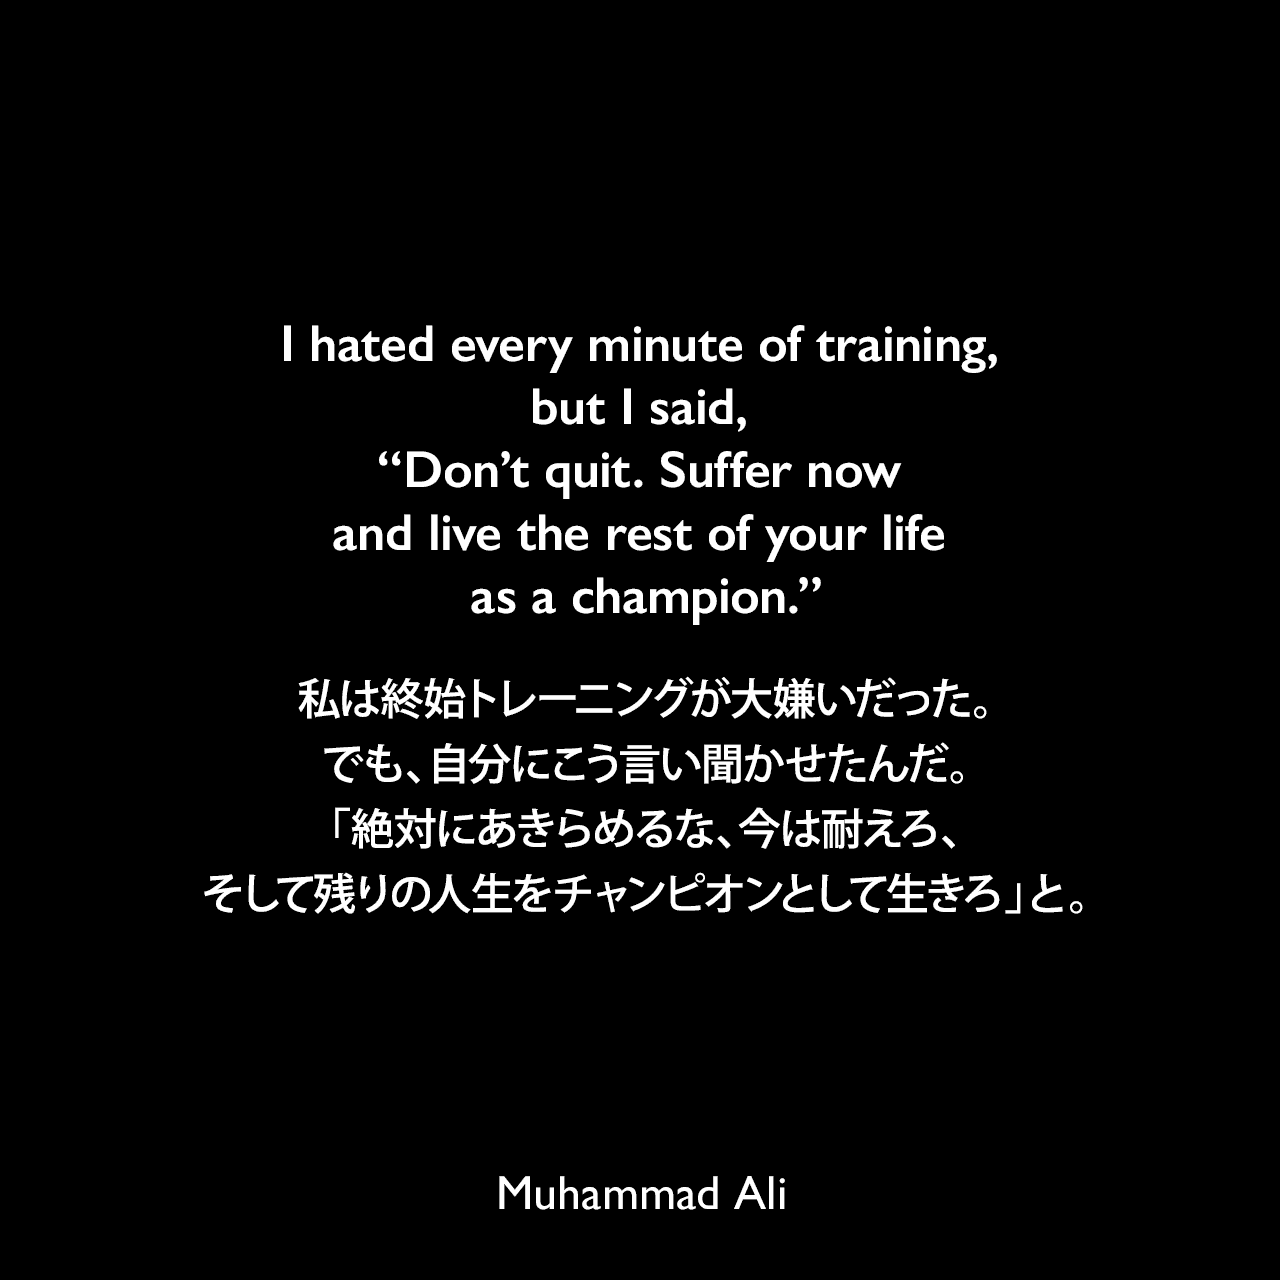 I hated every minute of training, but I said, “Don’t quit. Suffer now and live the rest of your life as a champion.”私は終始トレーニングが大嫌いだった。でも、自分にこう言い聞かせたんだ。「絶対にあきらめるな、今は耐えろ、そして残りの人生をチャンピオンとして生きろ」と。